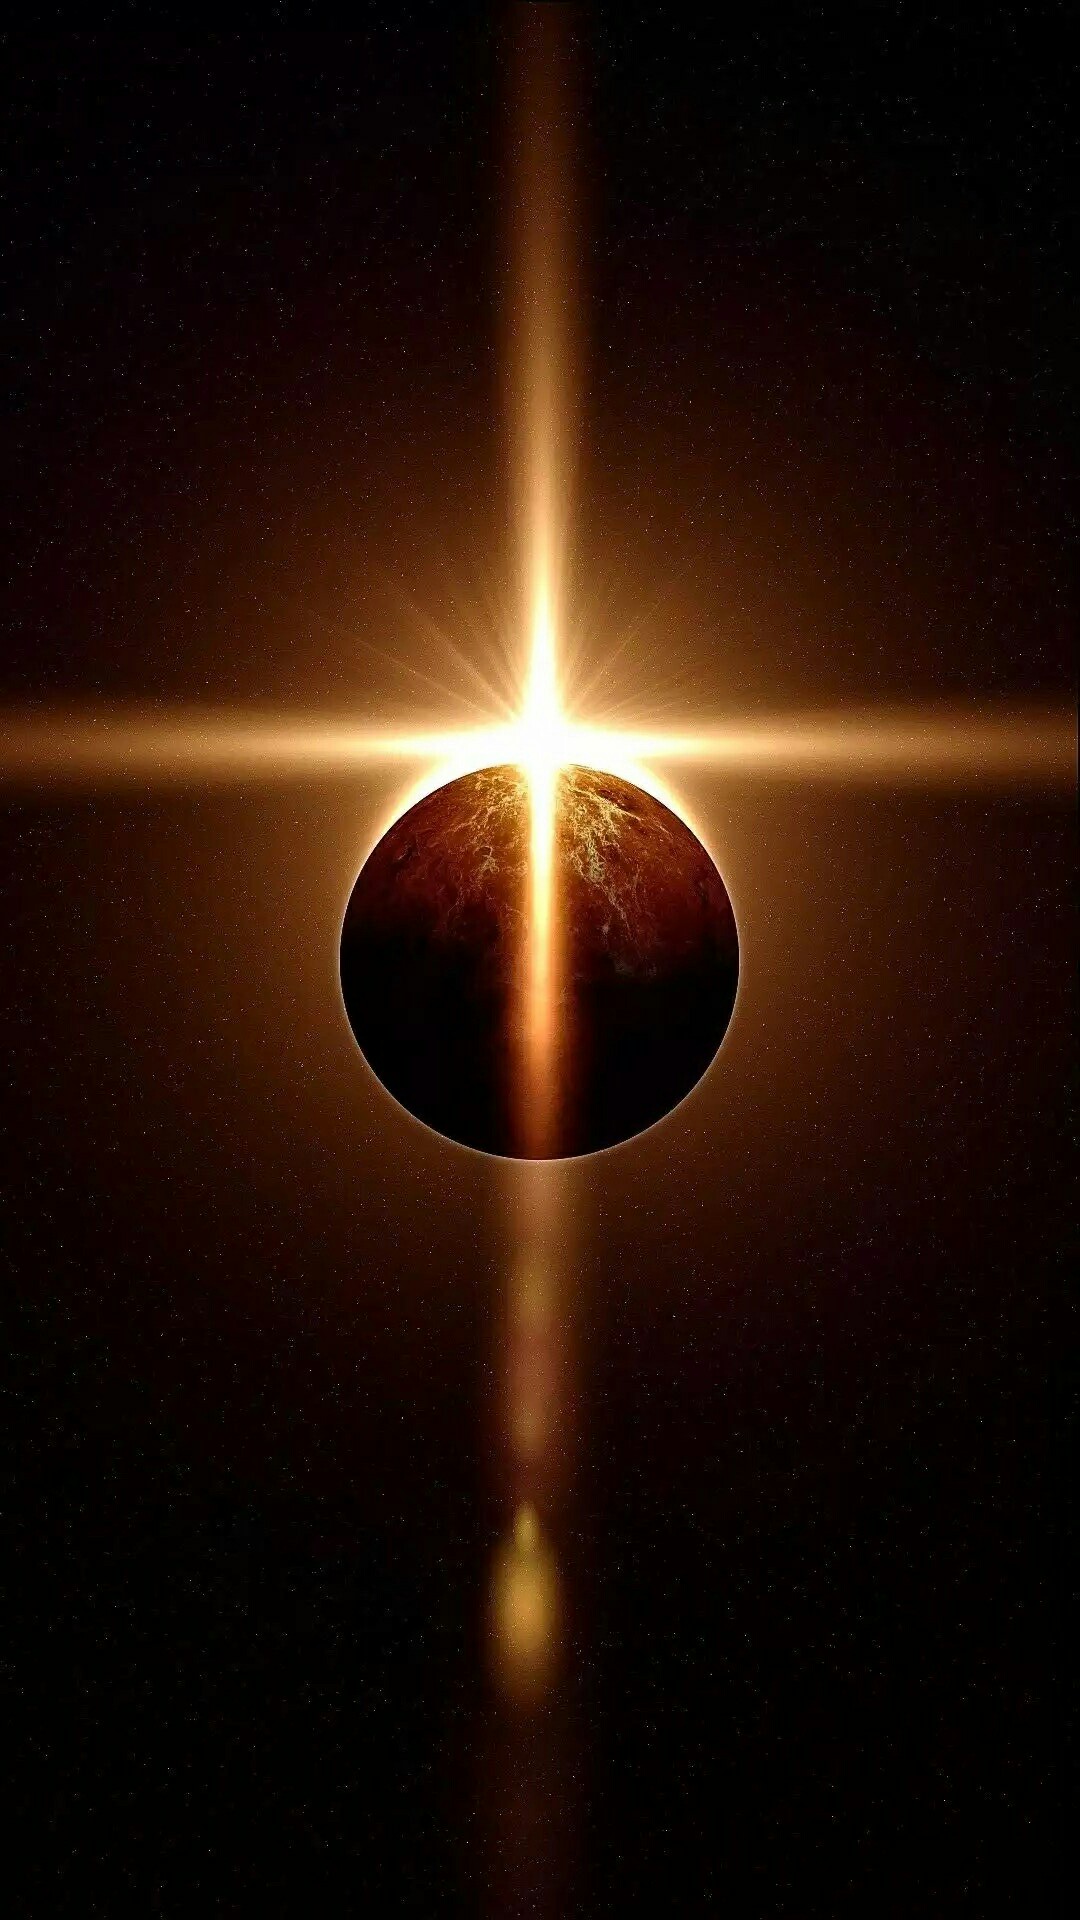 AwesomeTech94: Solar eclipse wallpapers